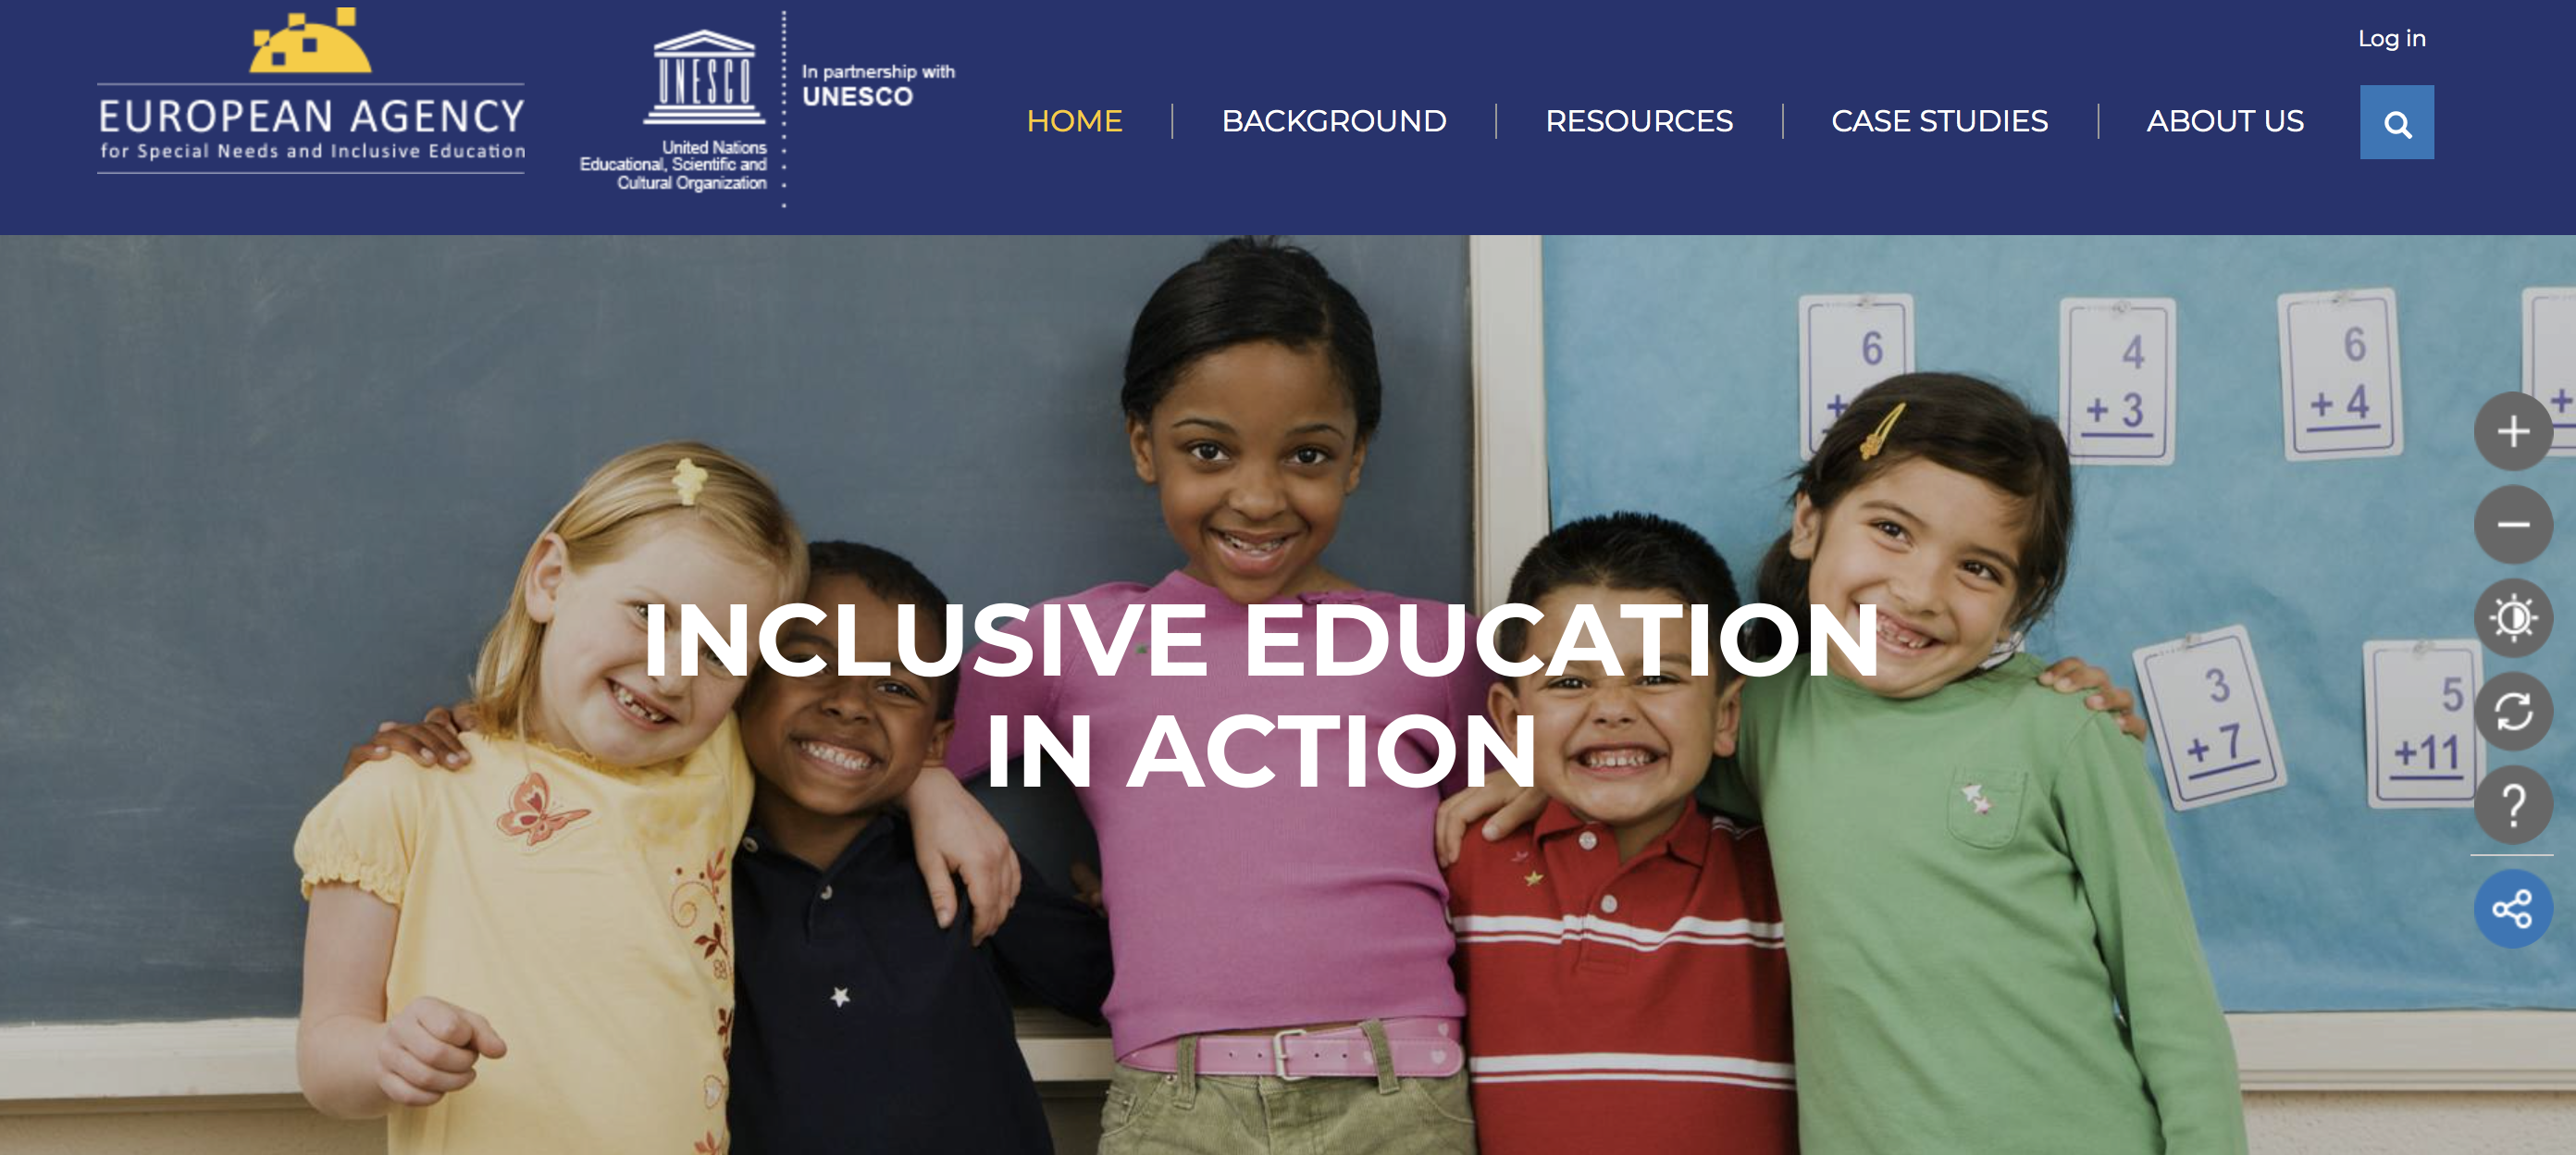 Inclusive Education in Action Online Resource Base: Open Call for Case Studies